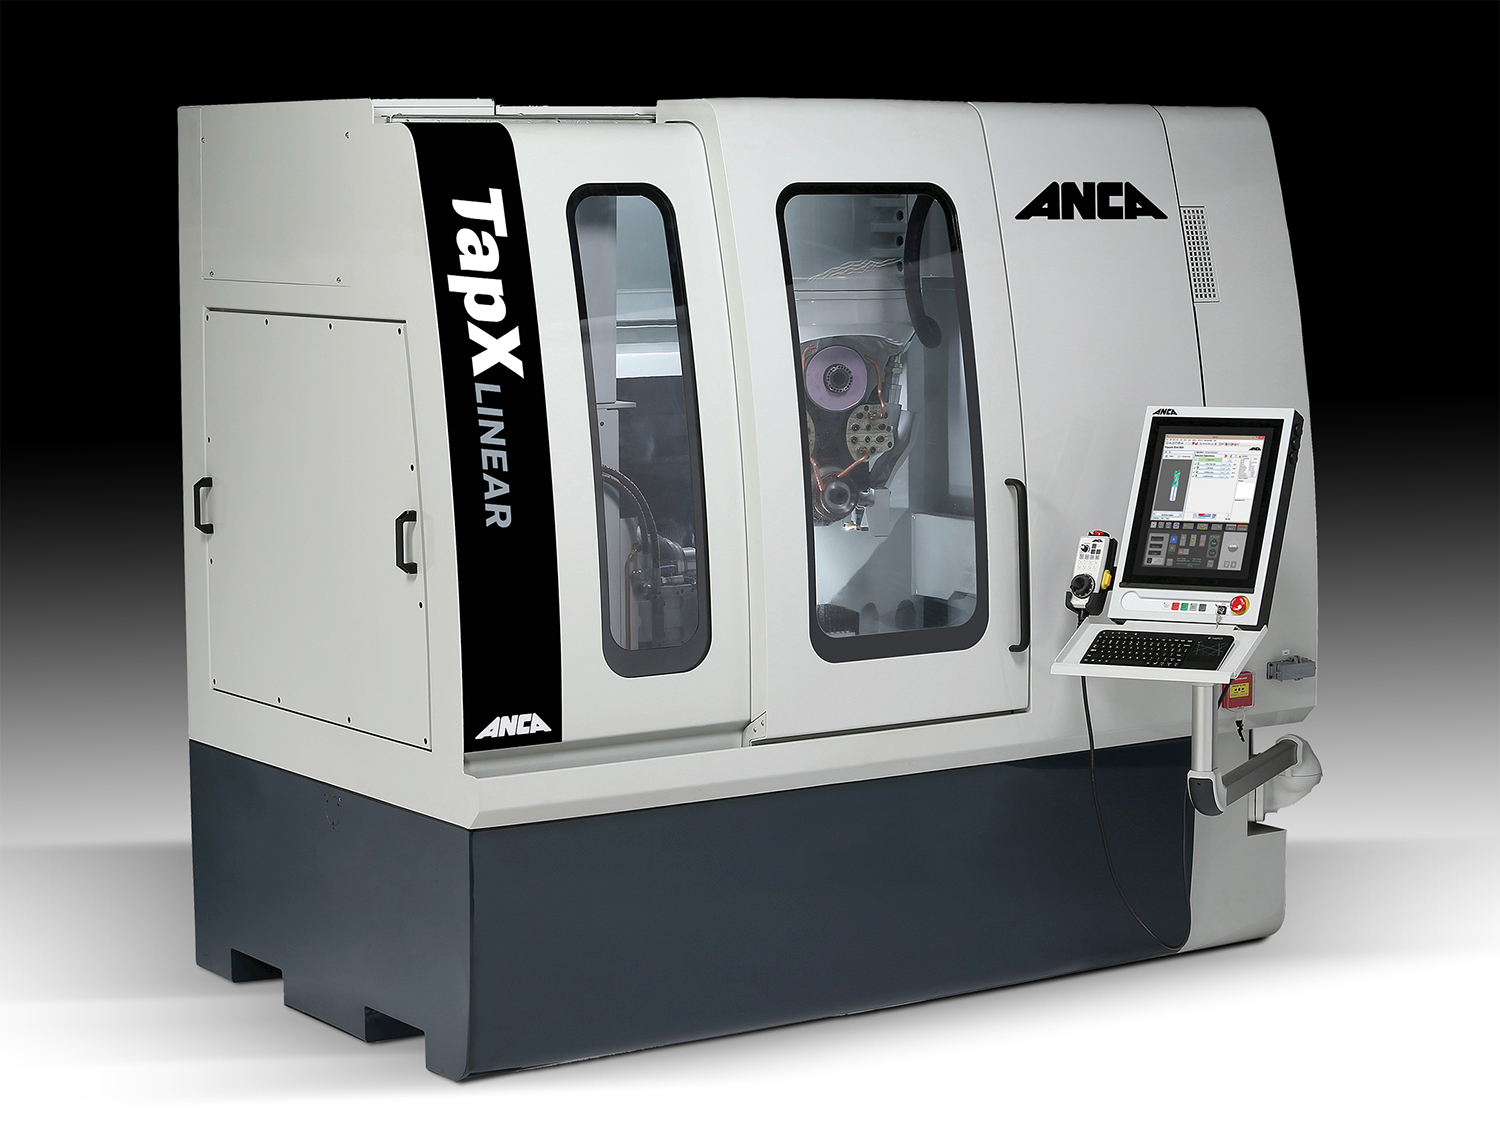 By performing multiple operations in a single machine, the TapX slashes tap-grinding setup times and improves accuracy.